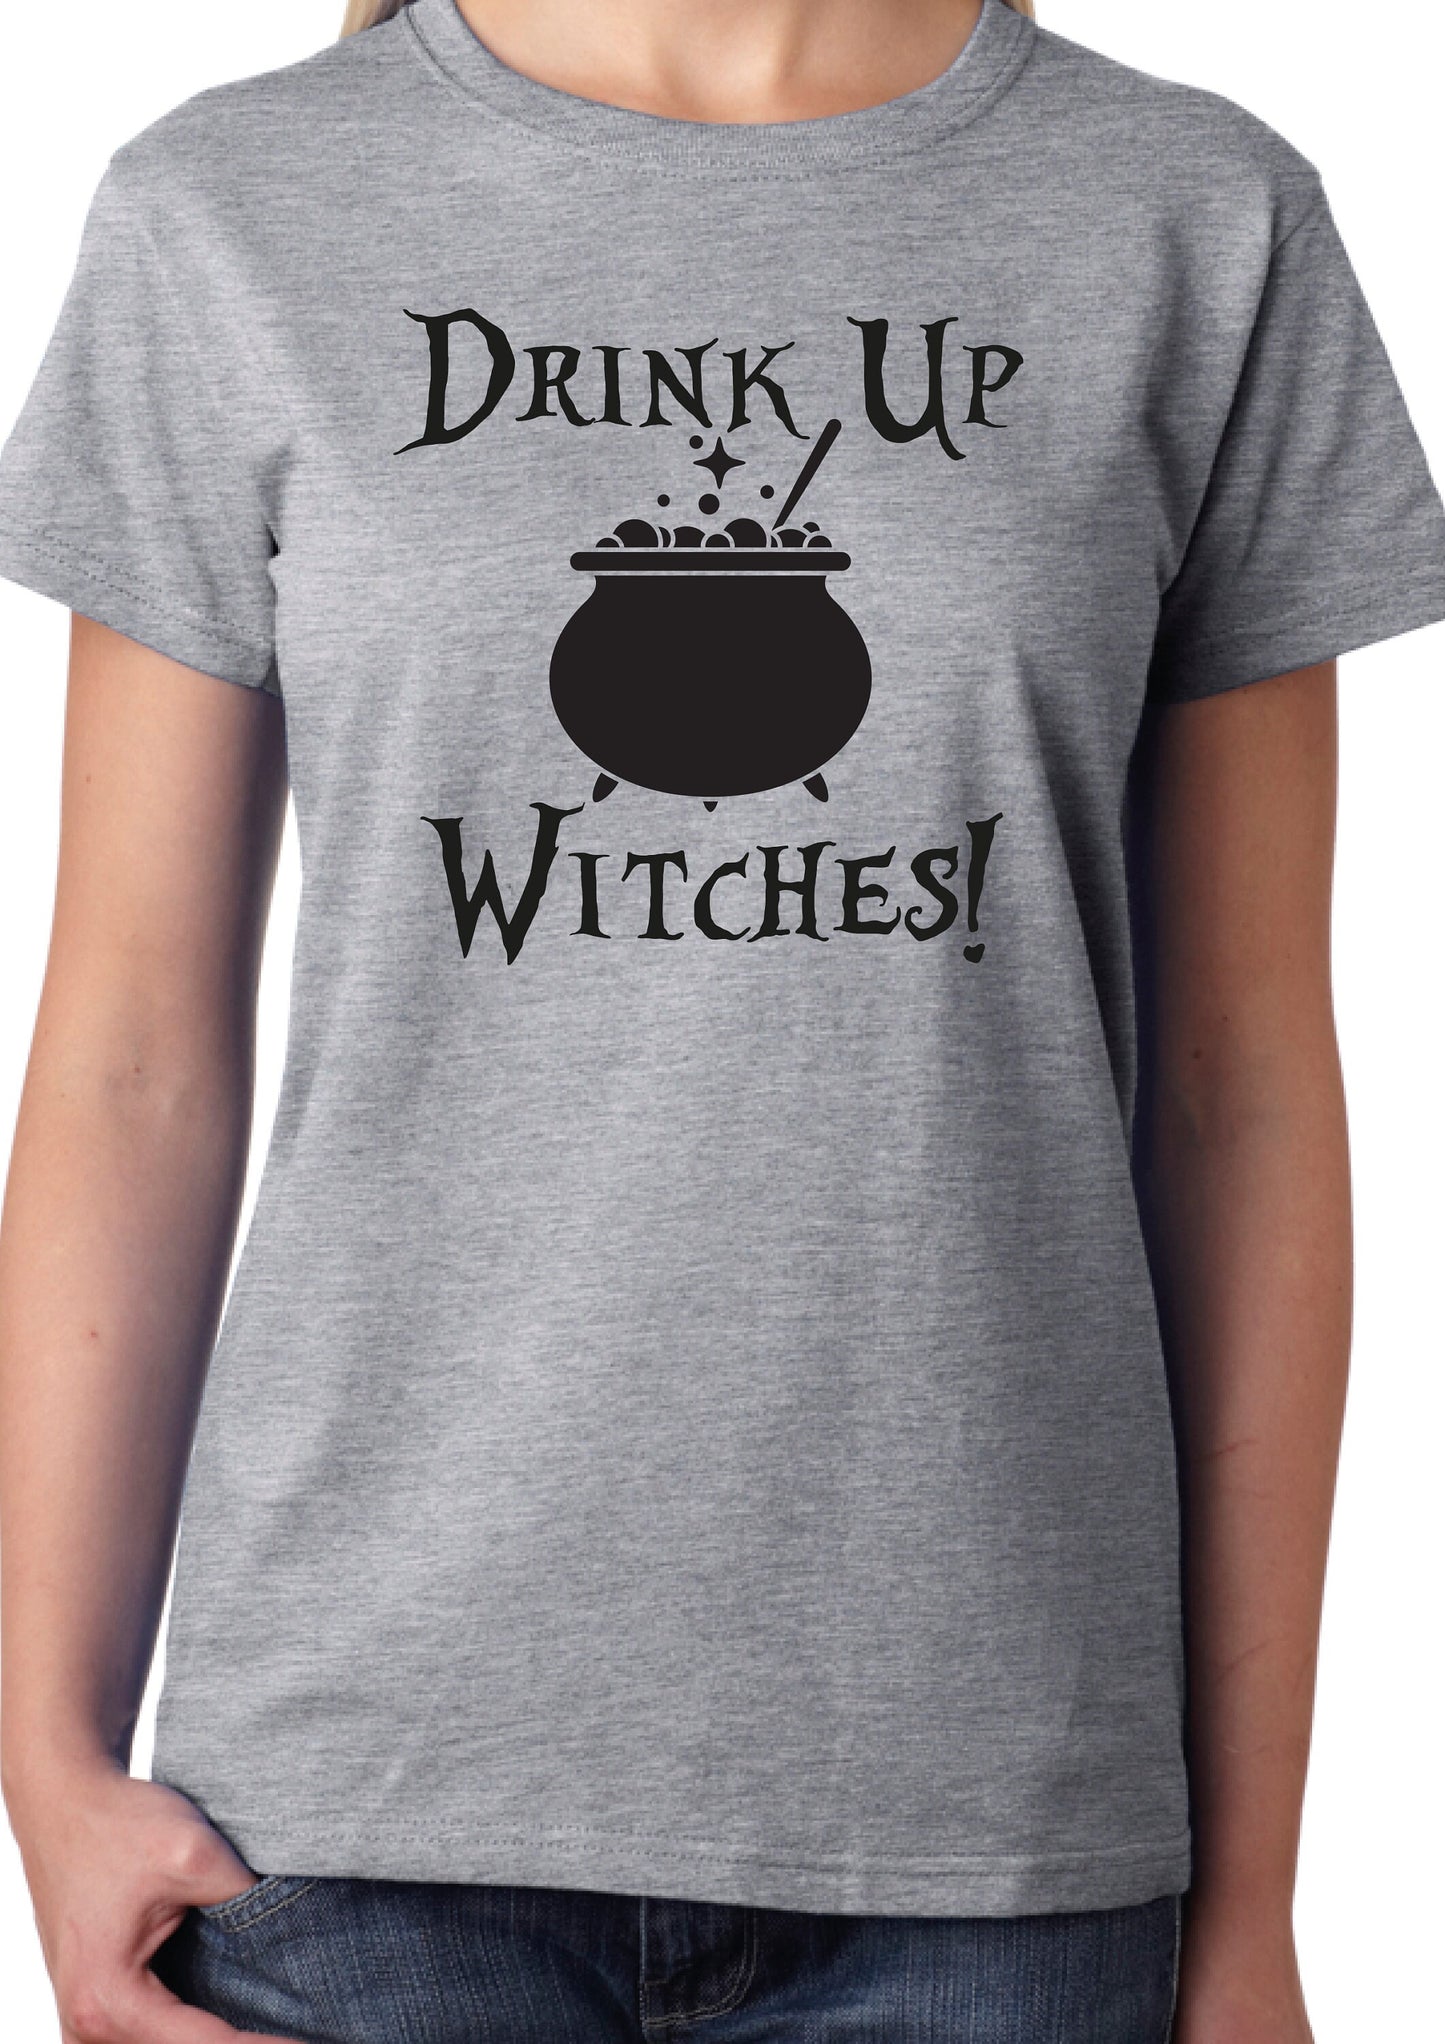 Drink Up Witches T-Shirt, Funny, Rude, Halloween Party, Hocus Pocus